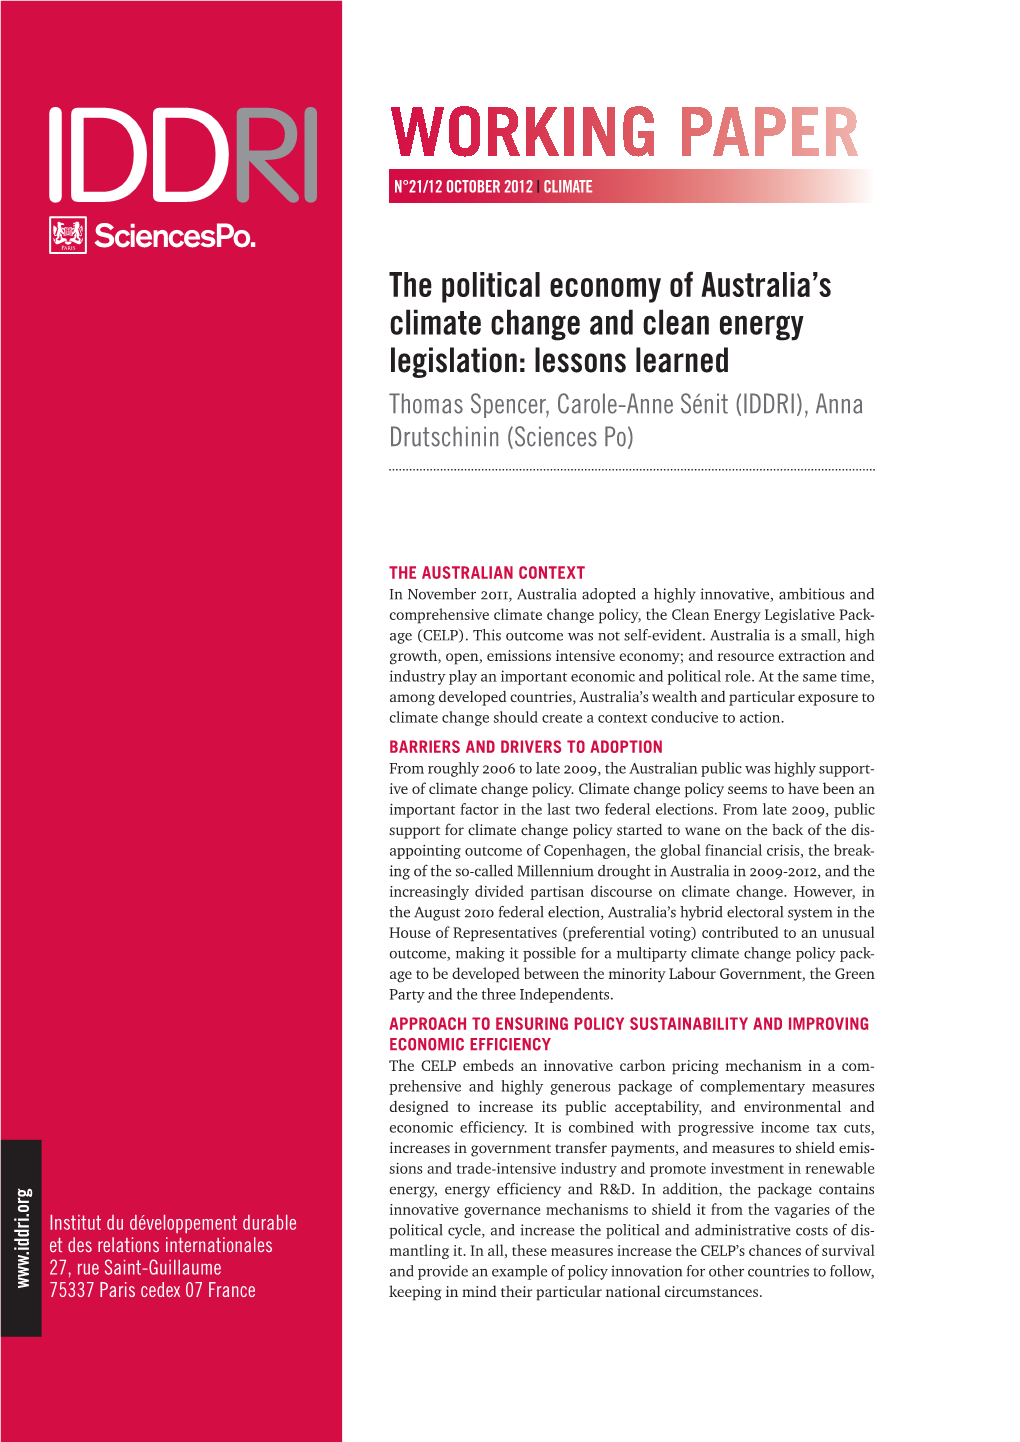 The Political Economy of Australia's Climate Change and Clean Energy Legislation